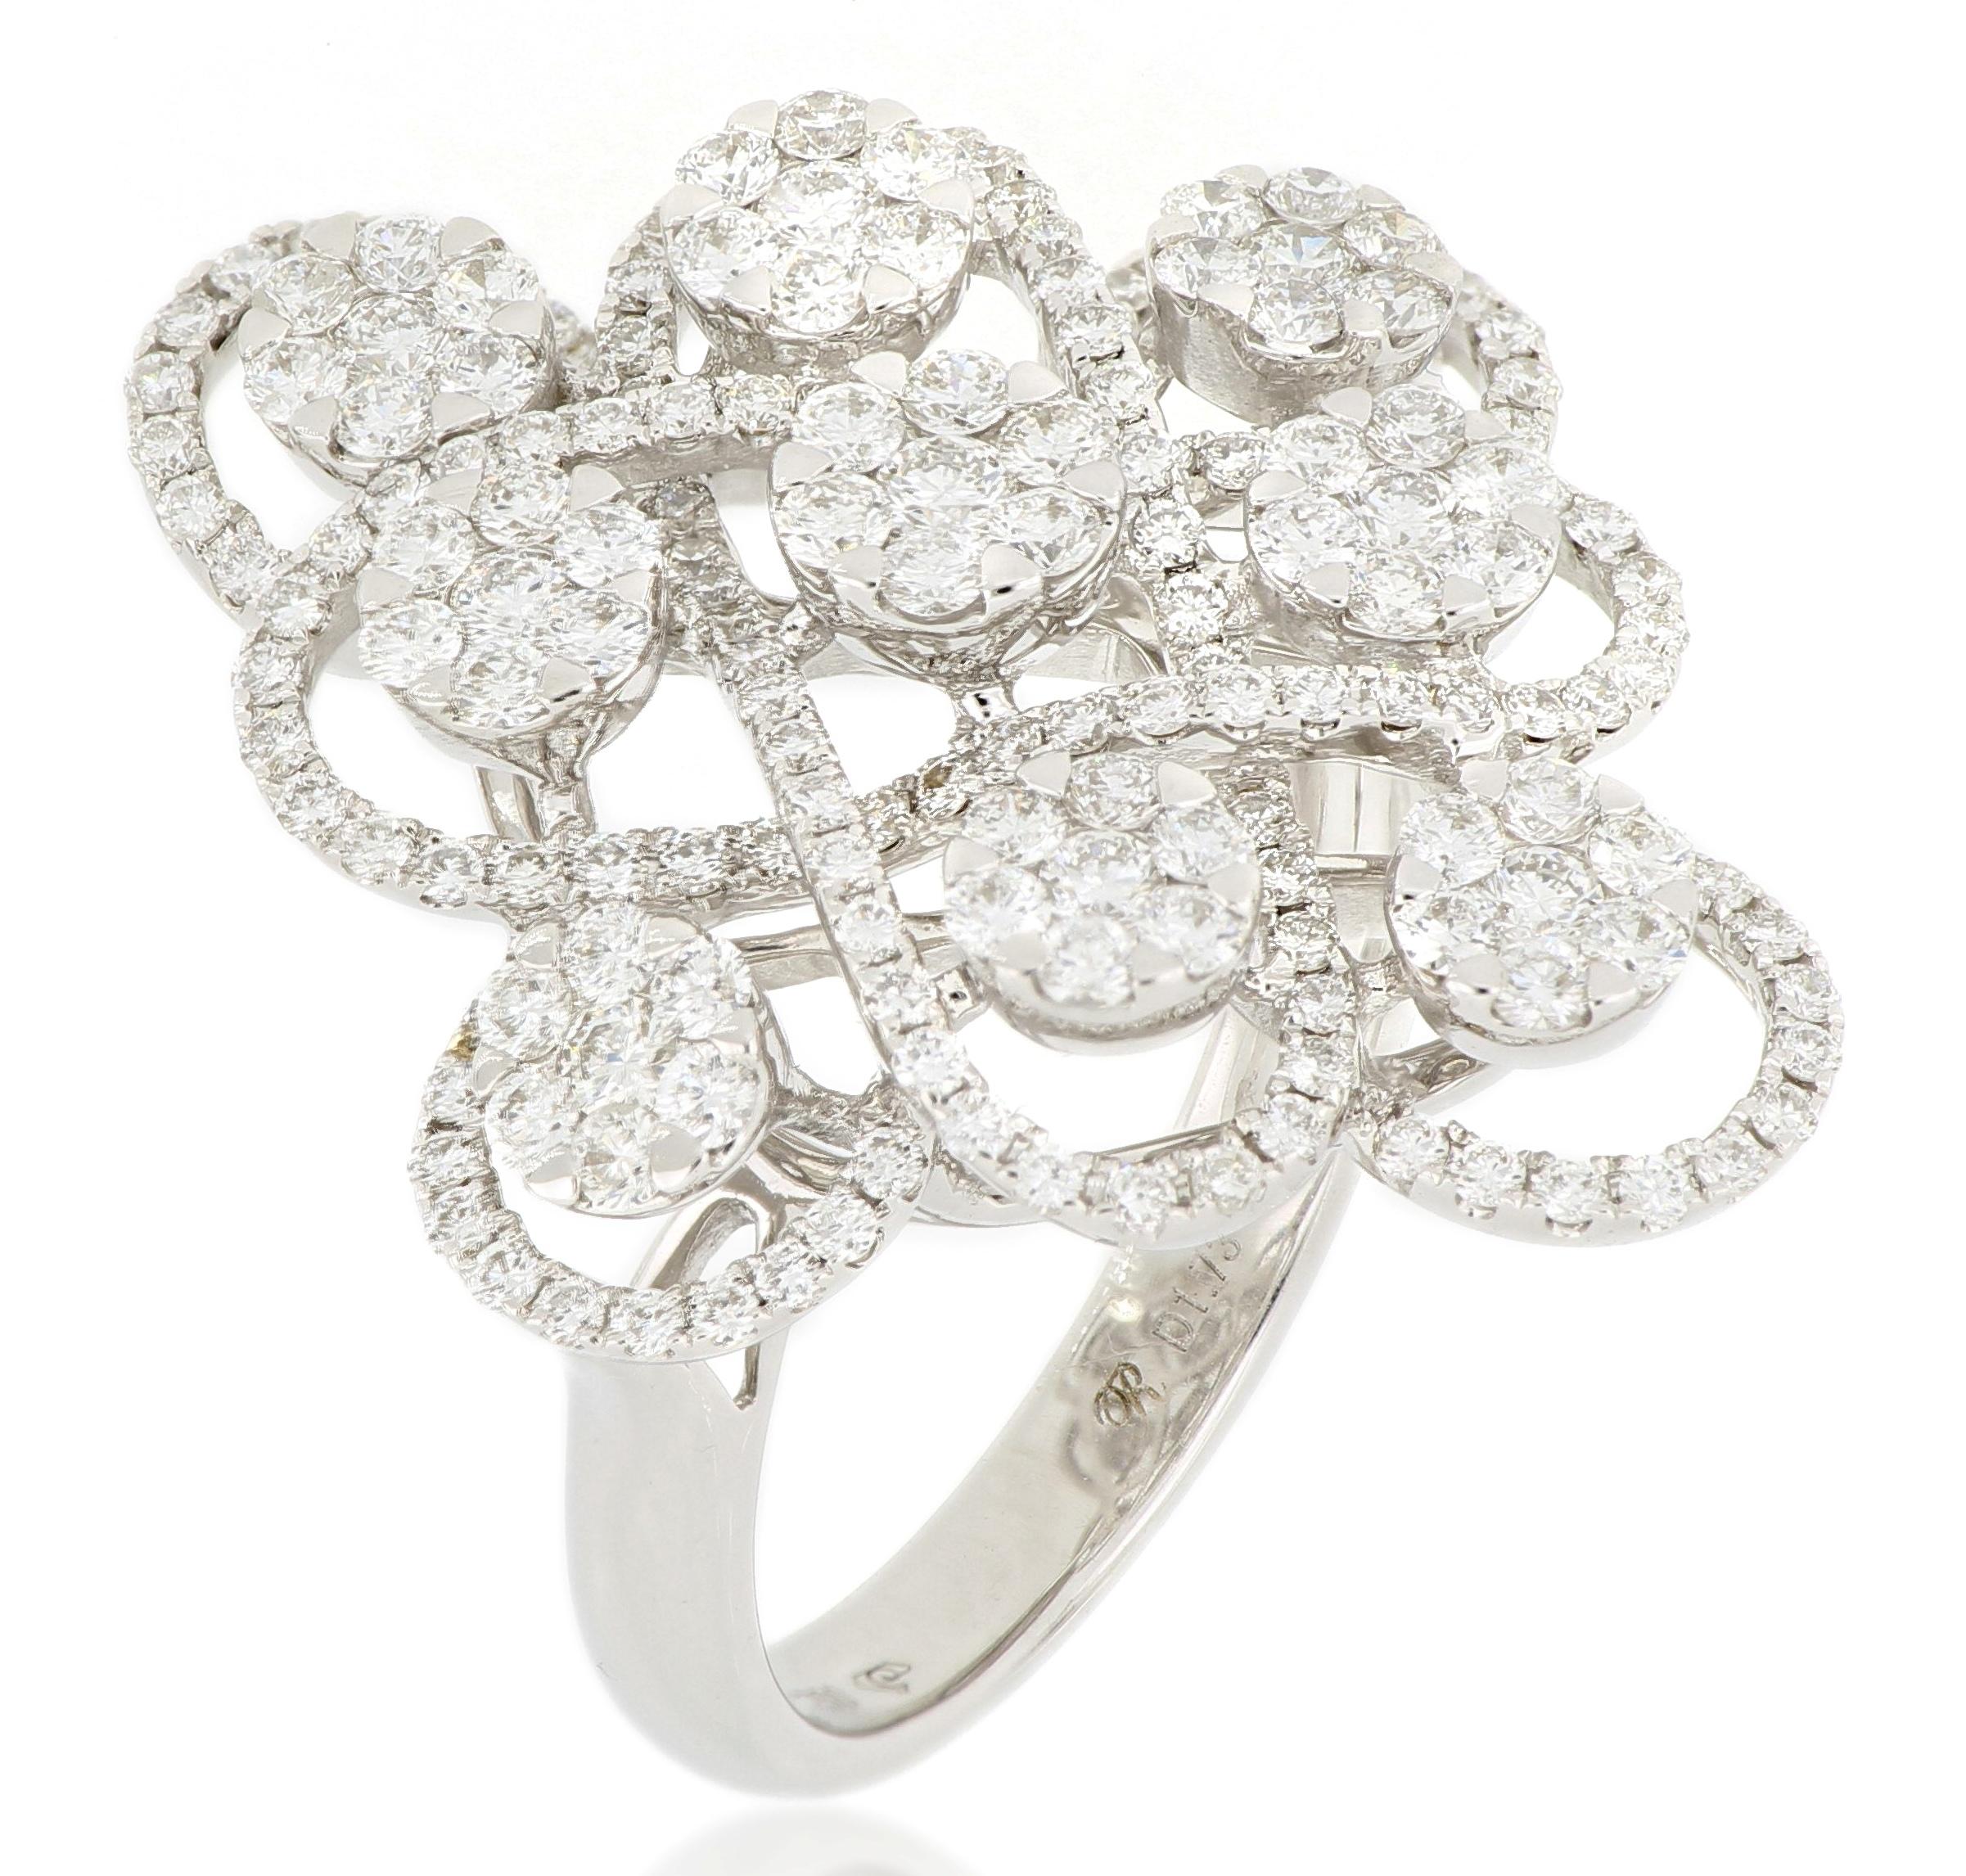 A diamond ring, nicely designed In symmetry, decorated by brilliant-cut diamonds weighing 1.73 carats in total, mounted in 18 Karat white gold.
A beautiful ring which can be worn for any occasion.
The brand is renowned for its high jewellery